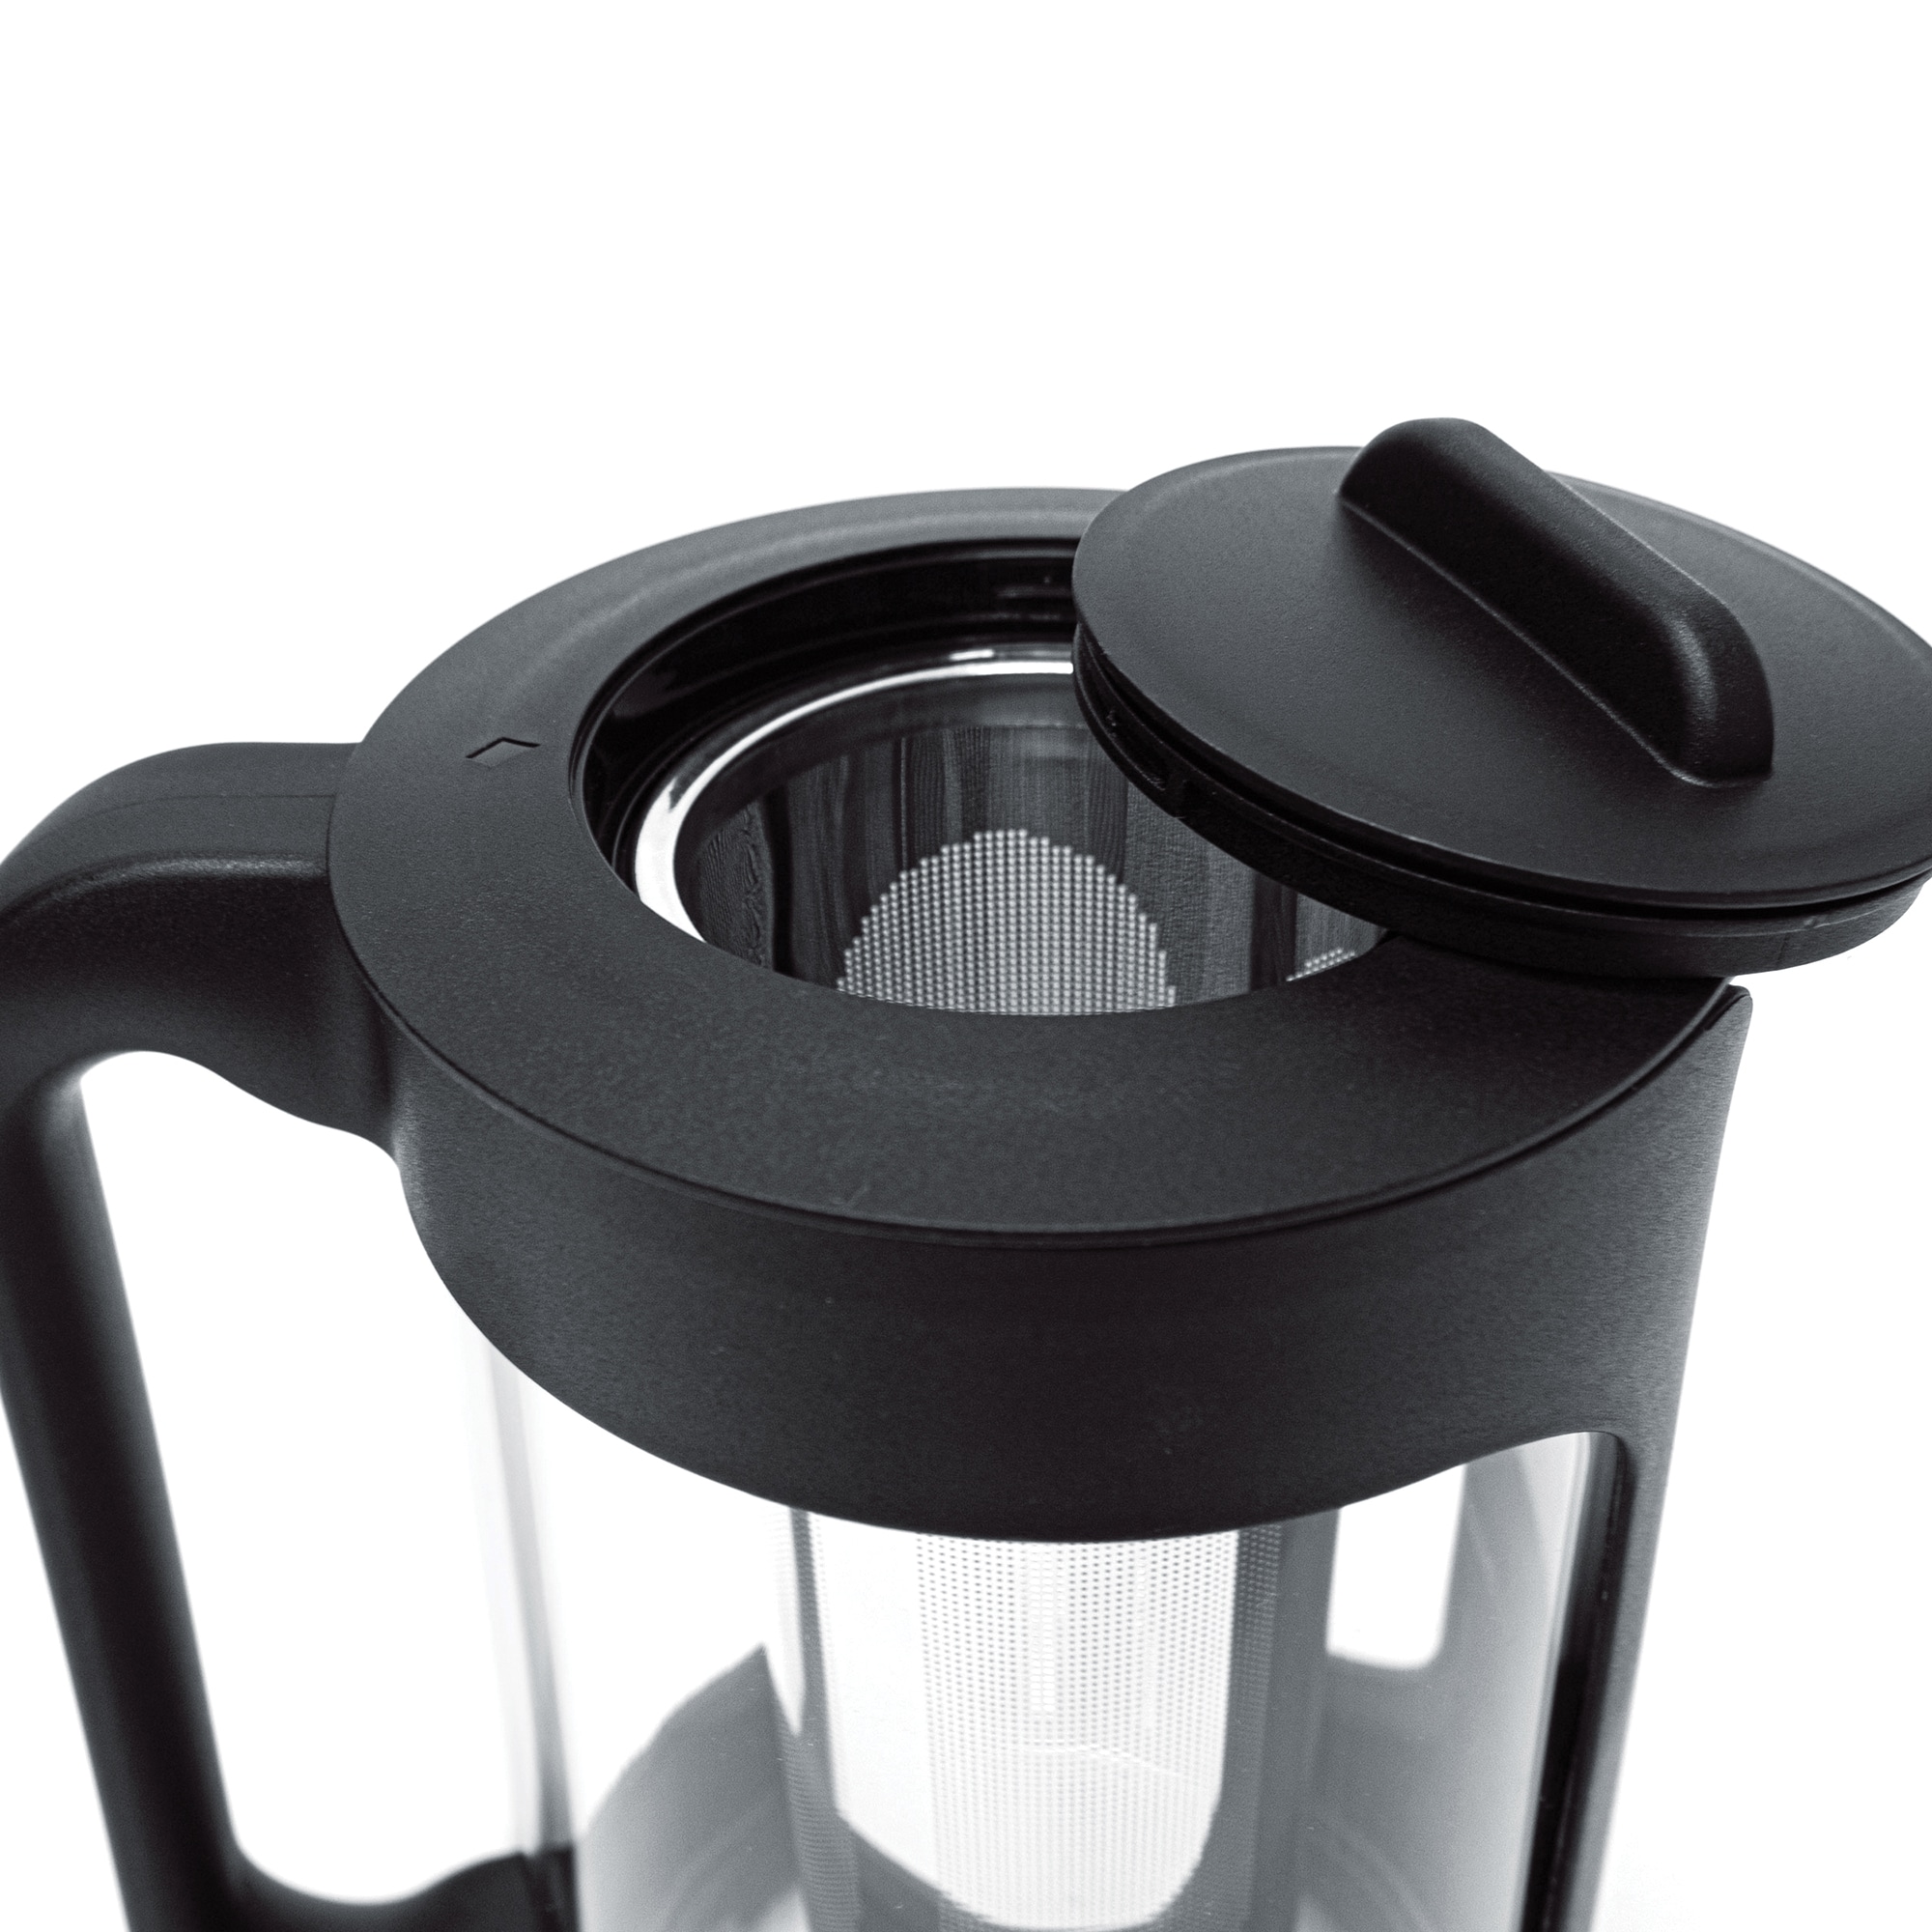 Cold Brew Coffee Makers for sale in Richmond, Virginia